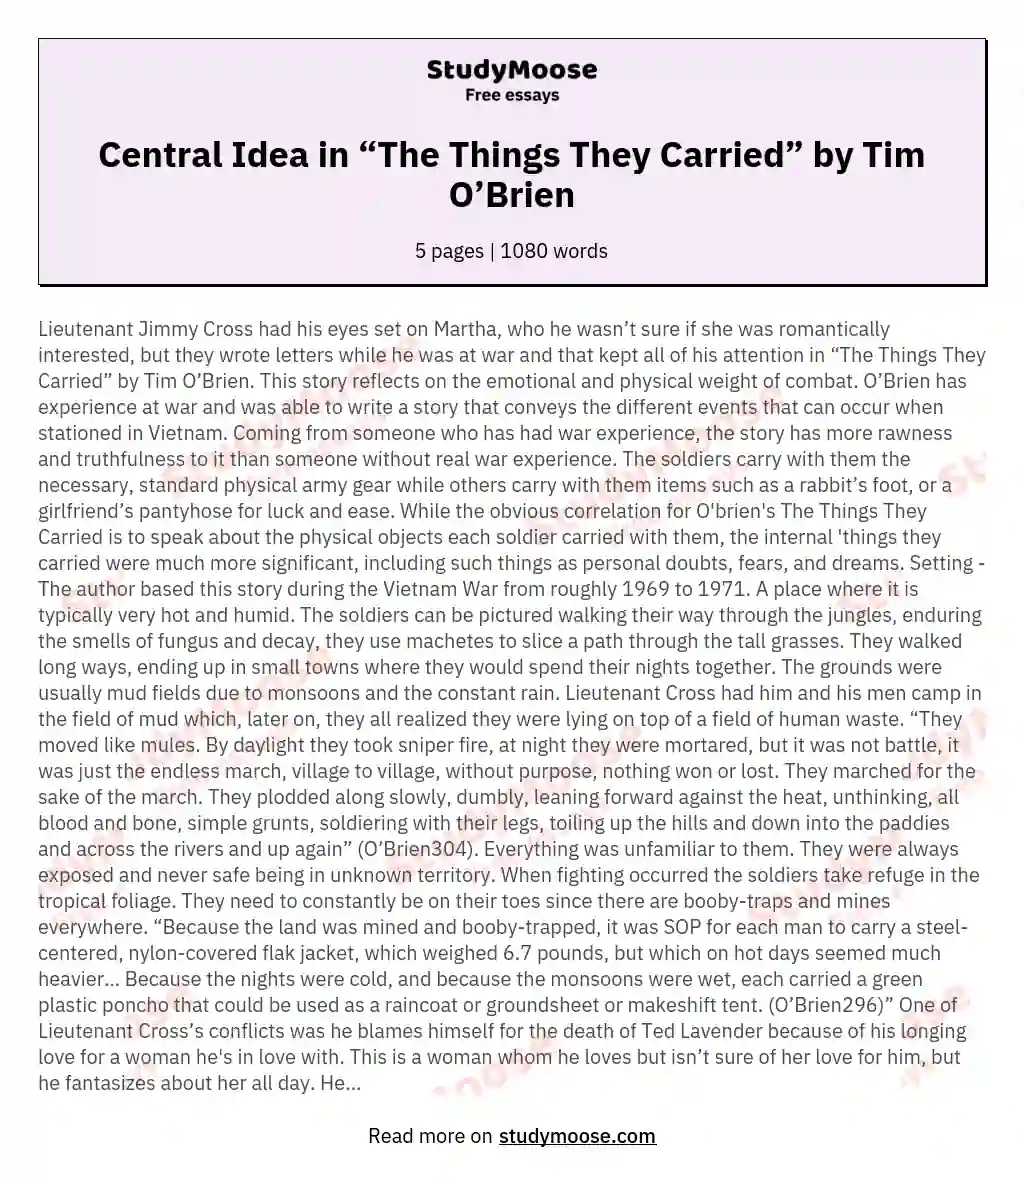 Central Idea in “The Things They Carried” by Tim O’Brien essay